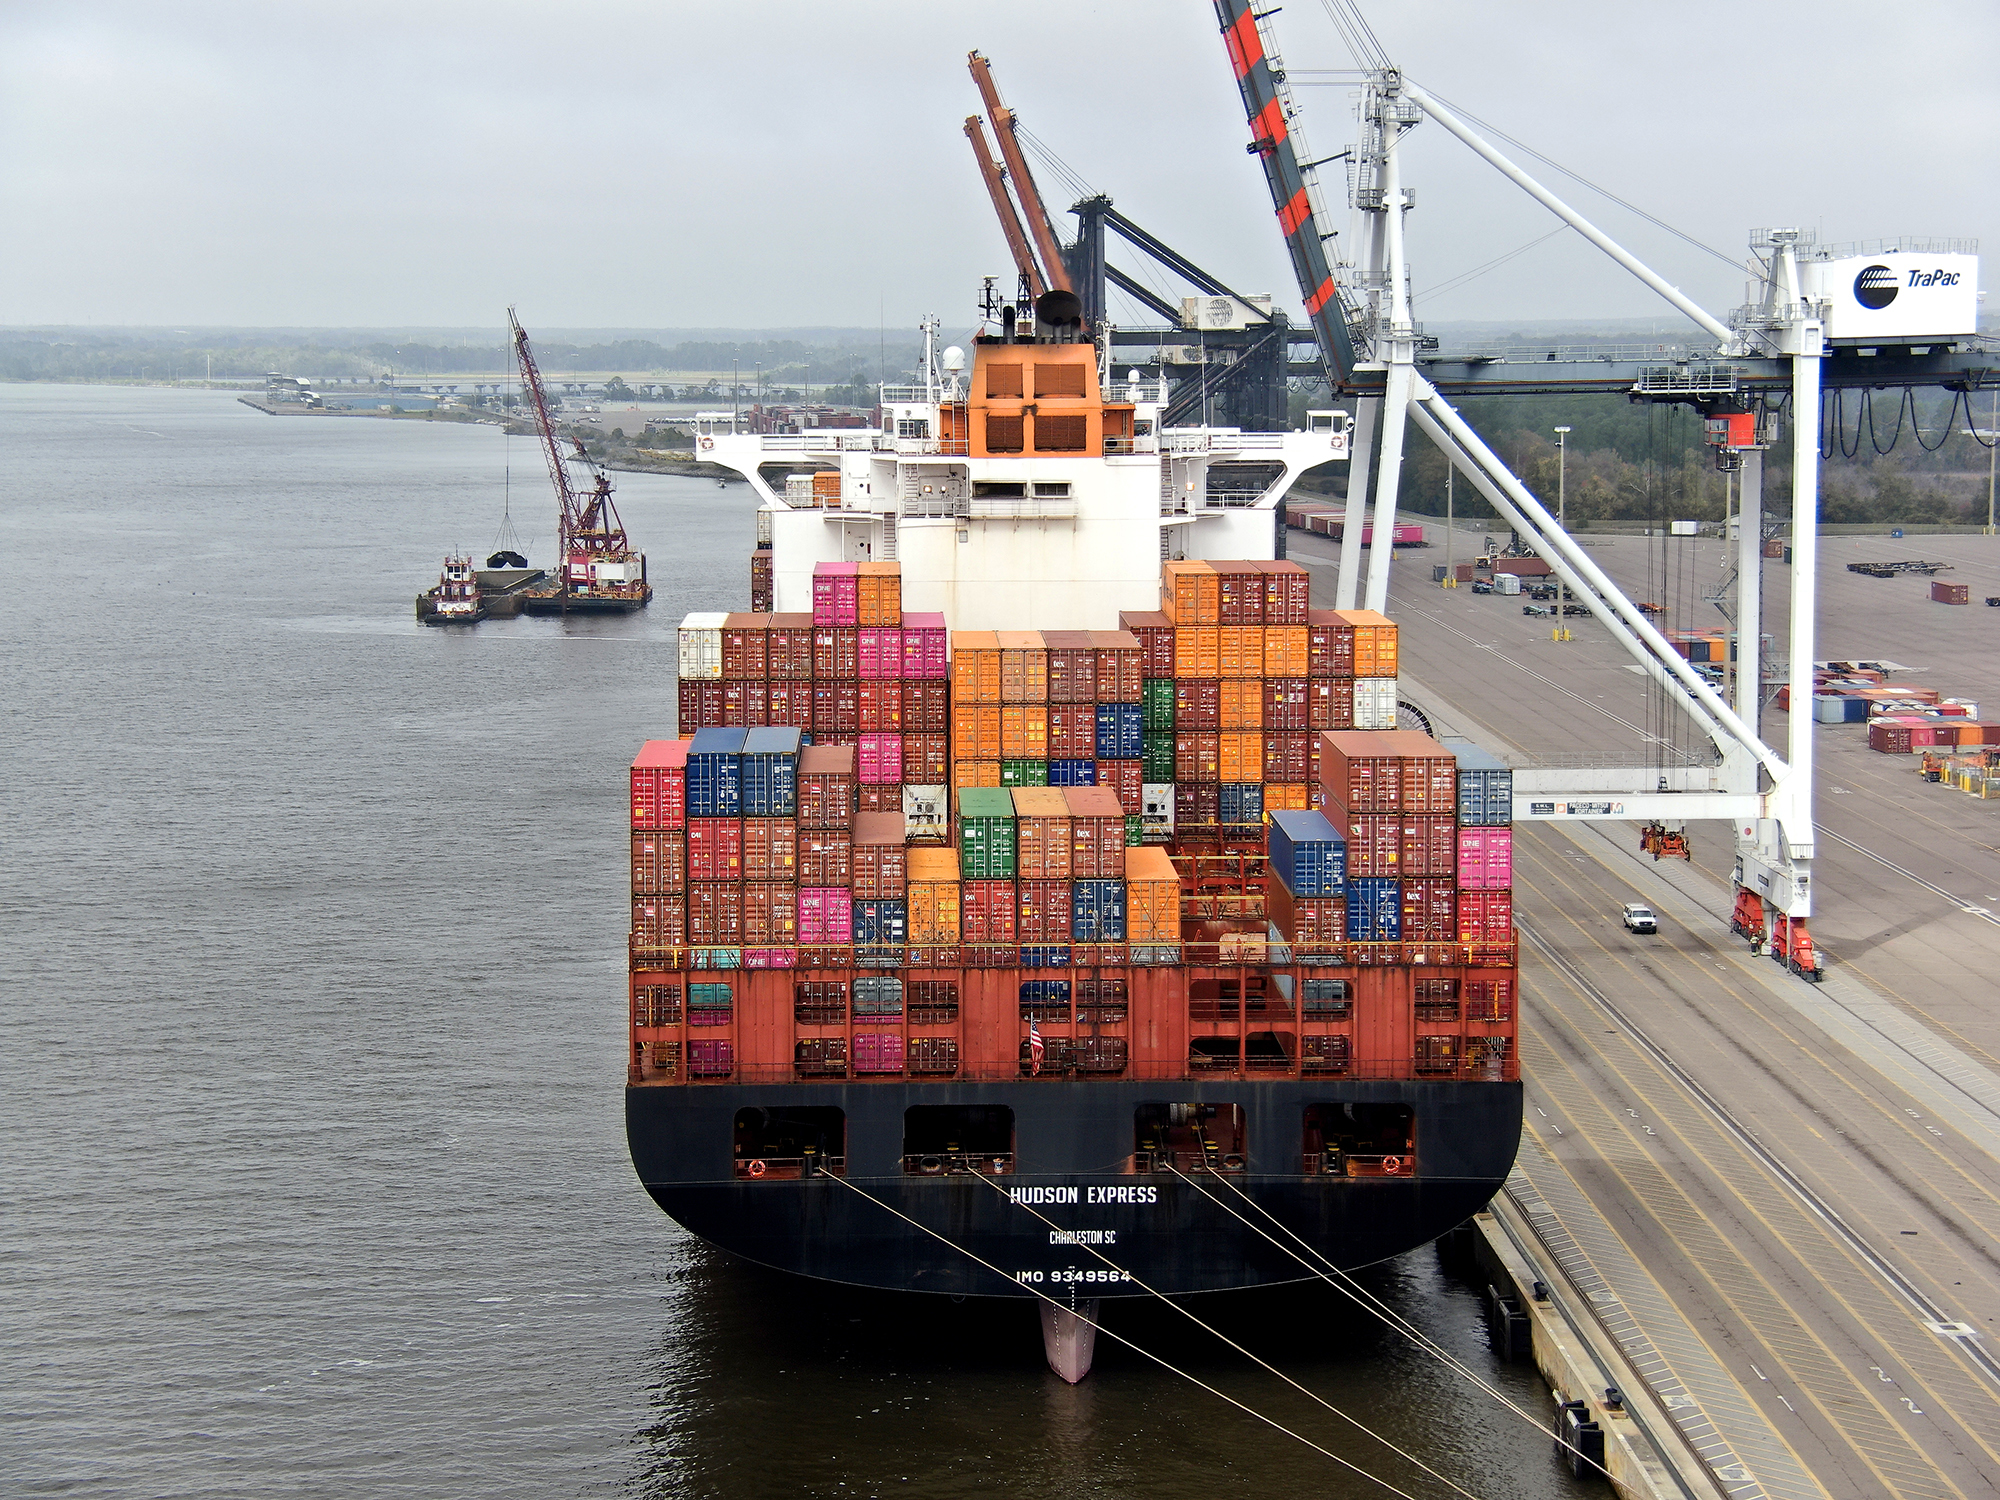 The Hudson Express container ship will visit JaxPort for the next eight weeks.